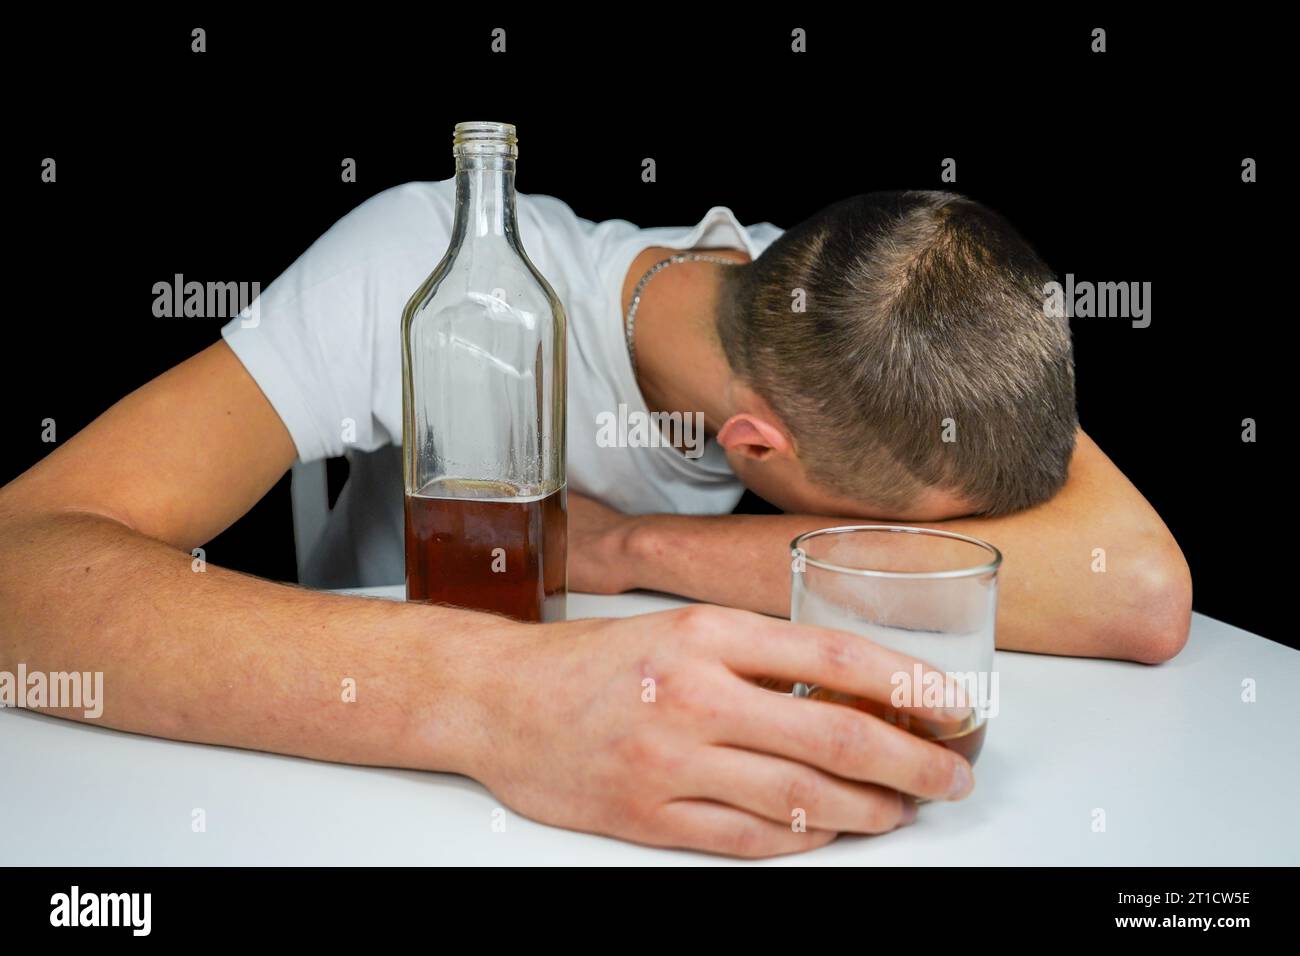 Car keys and alcohol on the table. Drunk man sleeping on the table with bottle of whiskey and drink. Alcoholism. Don't drive when you're drunk. Stock Photo